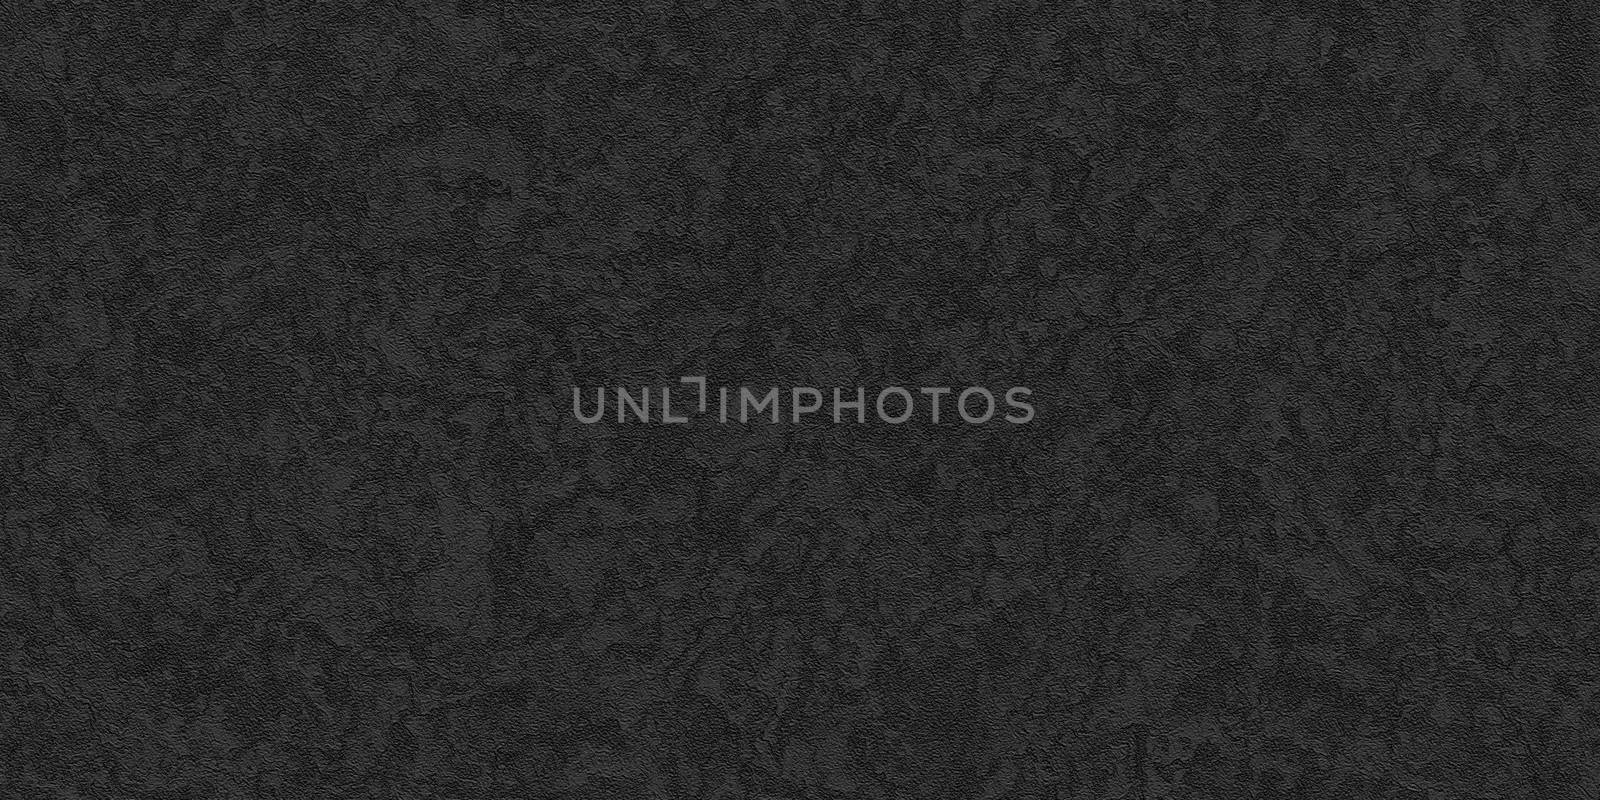 Rough Black Art Paper Seamless Texture. Blank Page Background. by sanches812